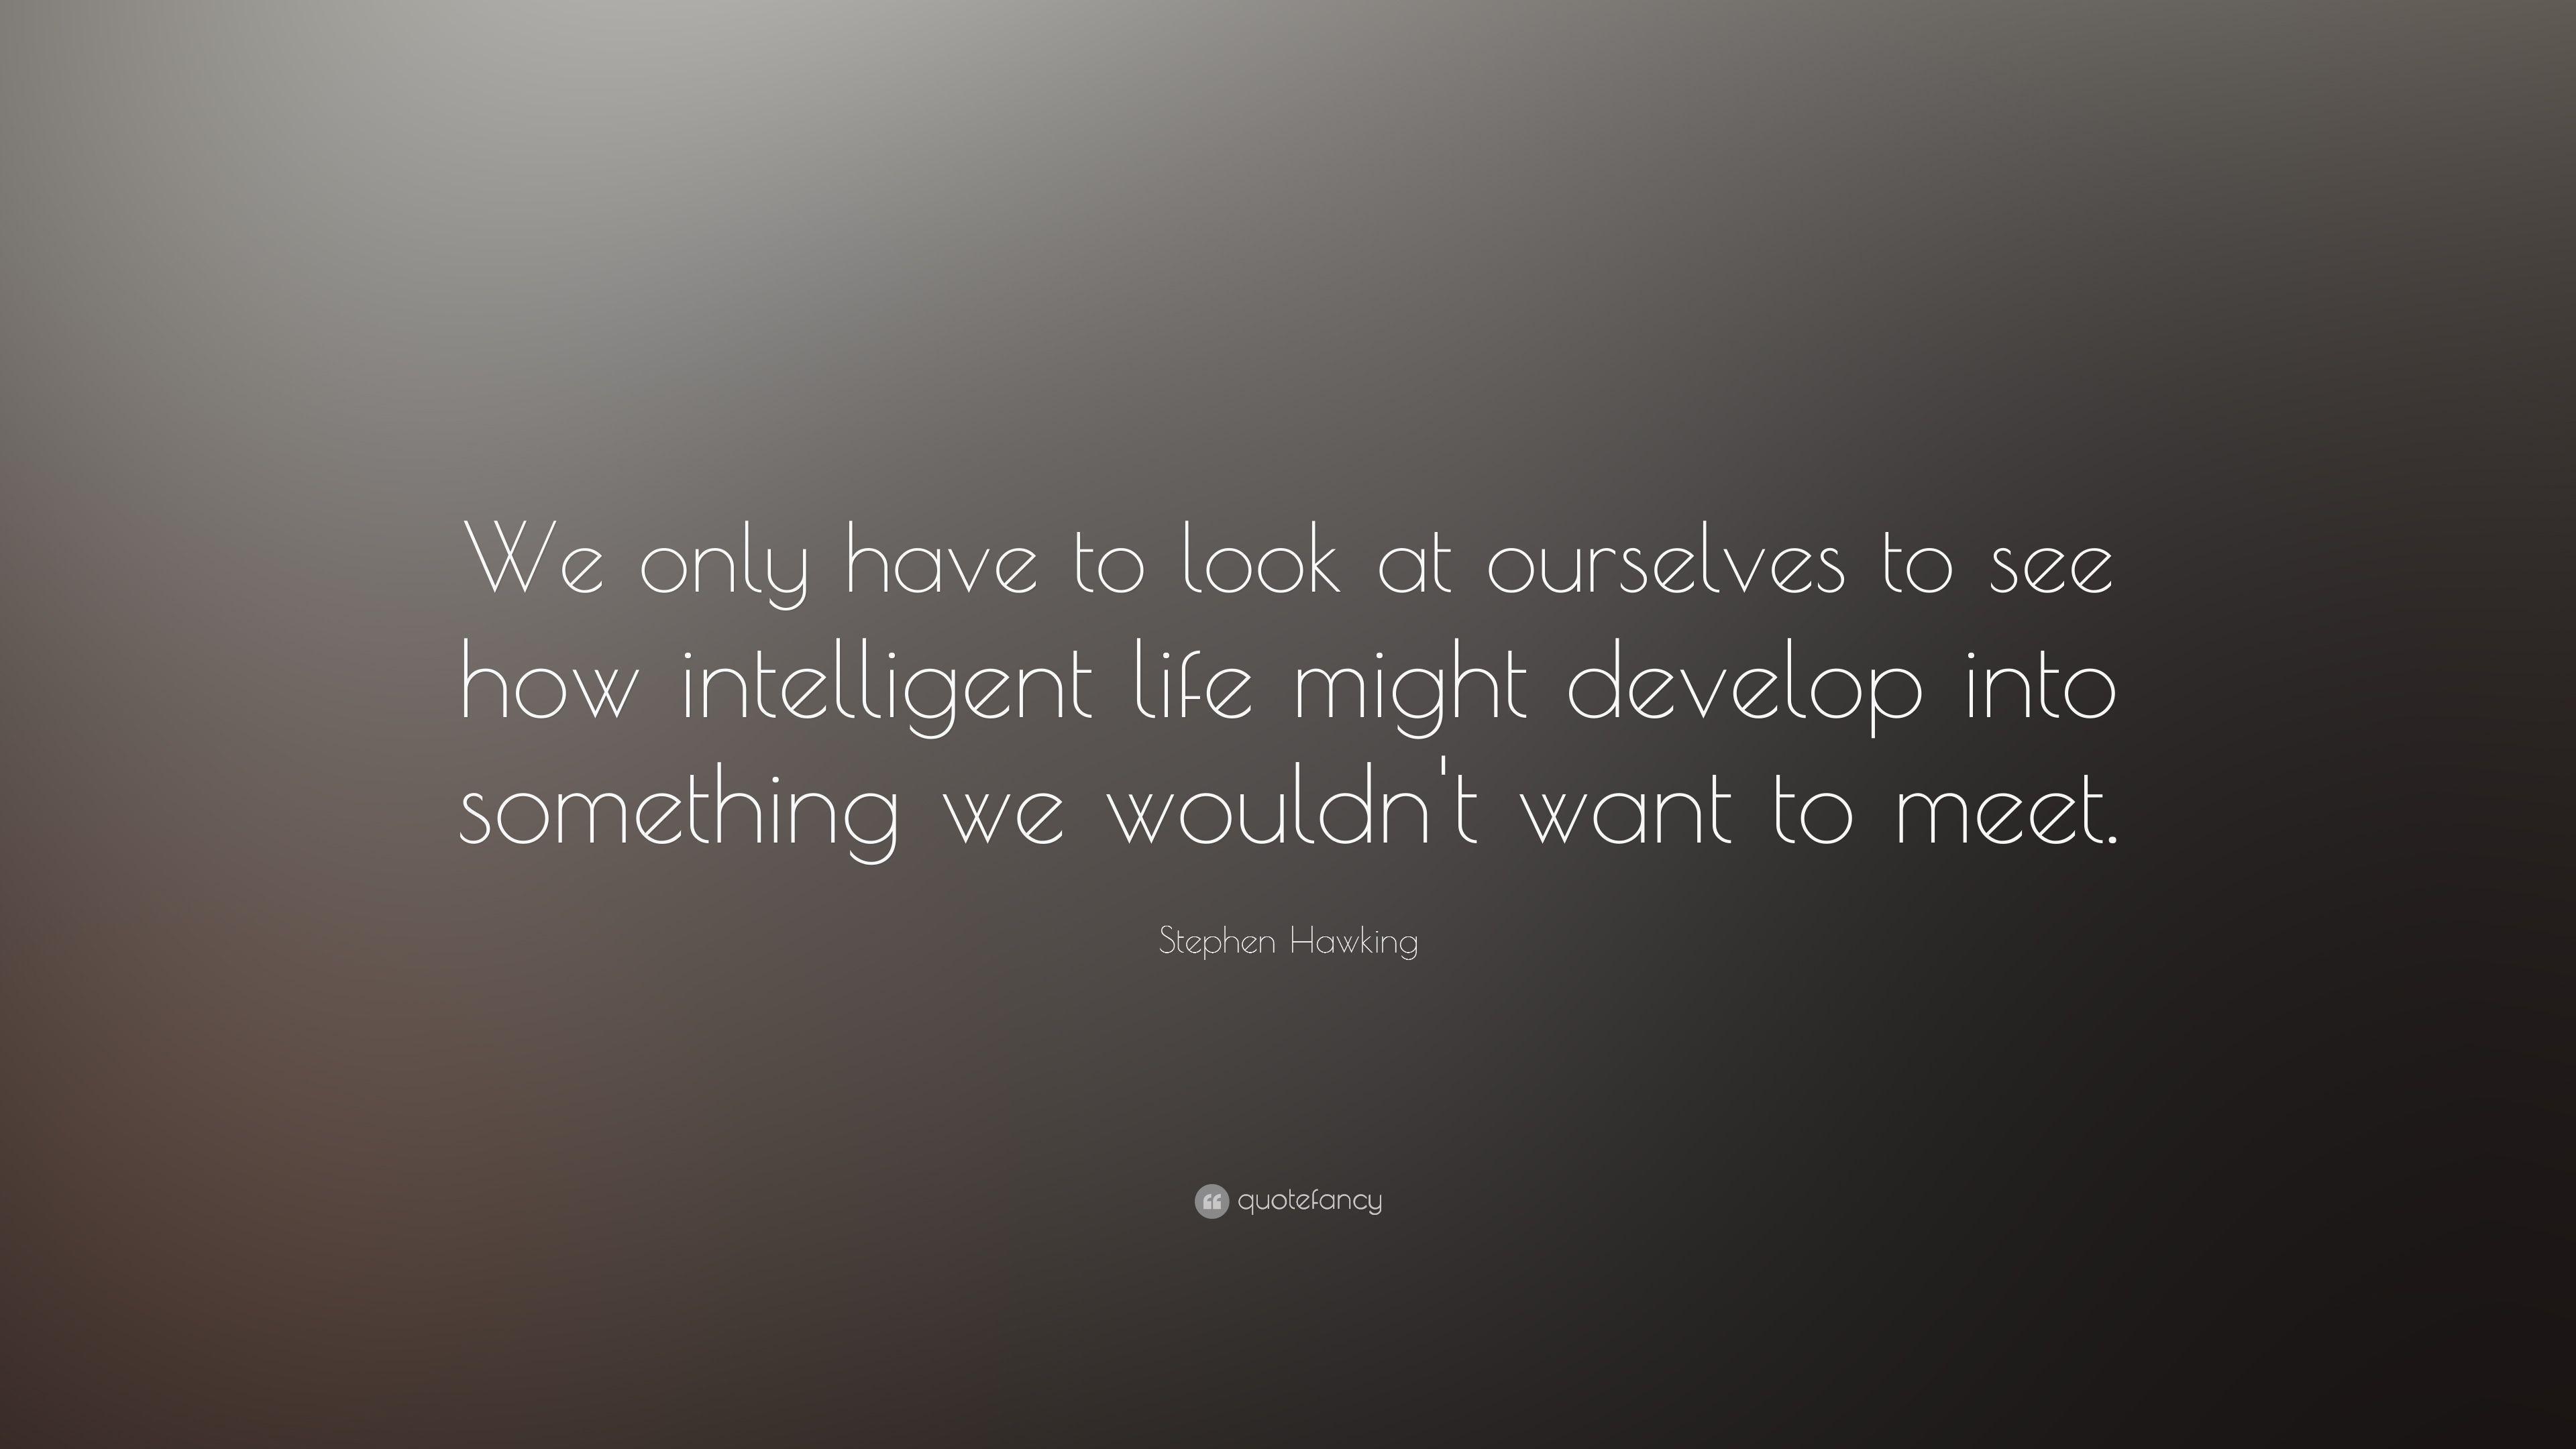 Stephen Hawking Quotes On Love Stephen Hawking Wallpapers